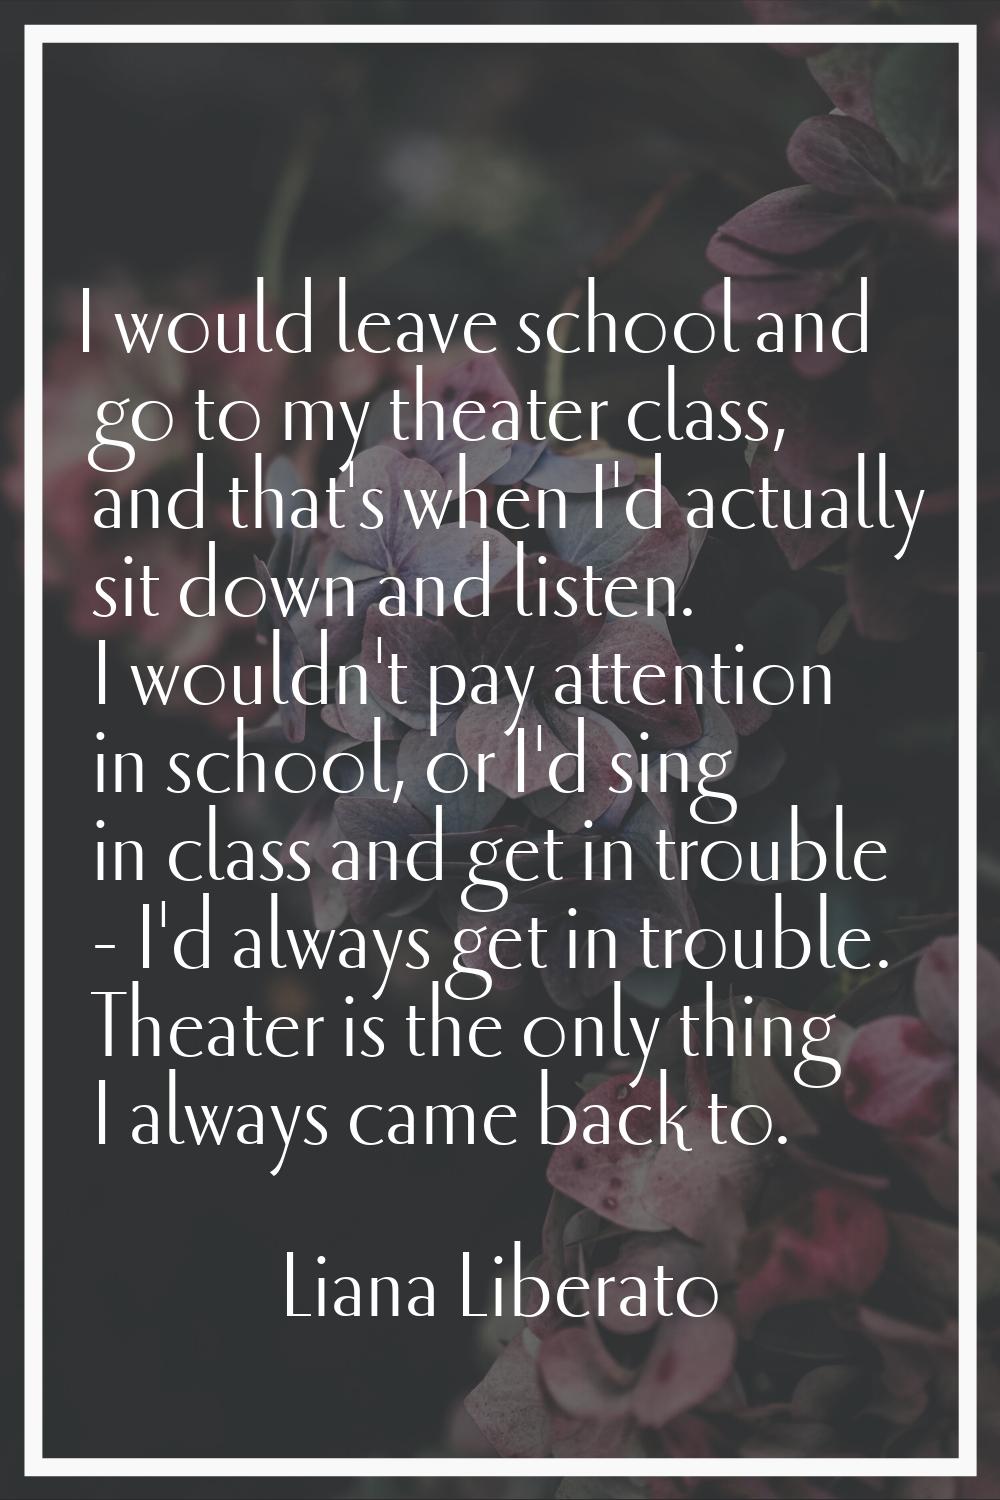 I would leave school and go to my theater class, and that's when I'd actually sit down and listen. 